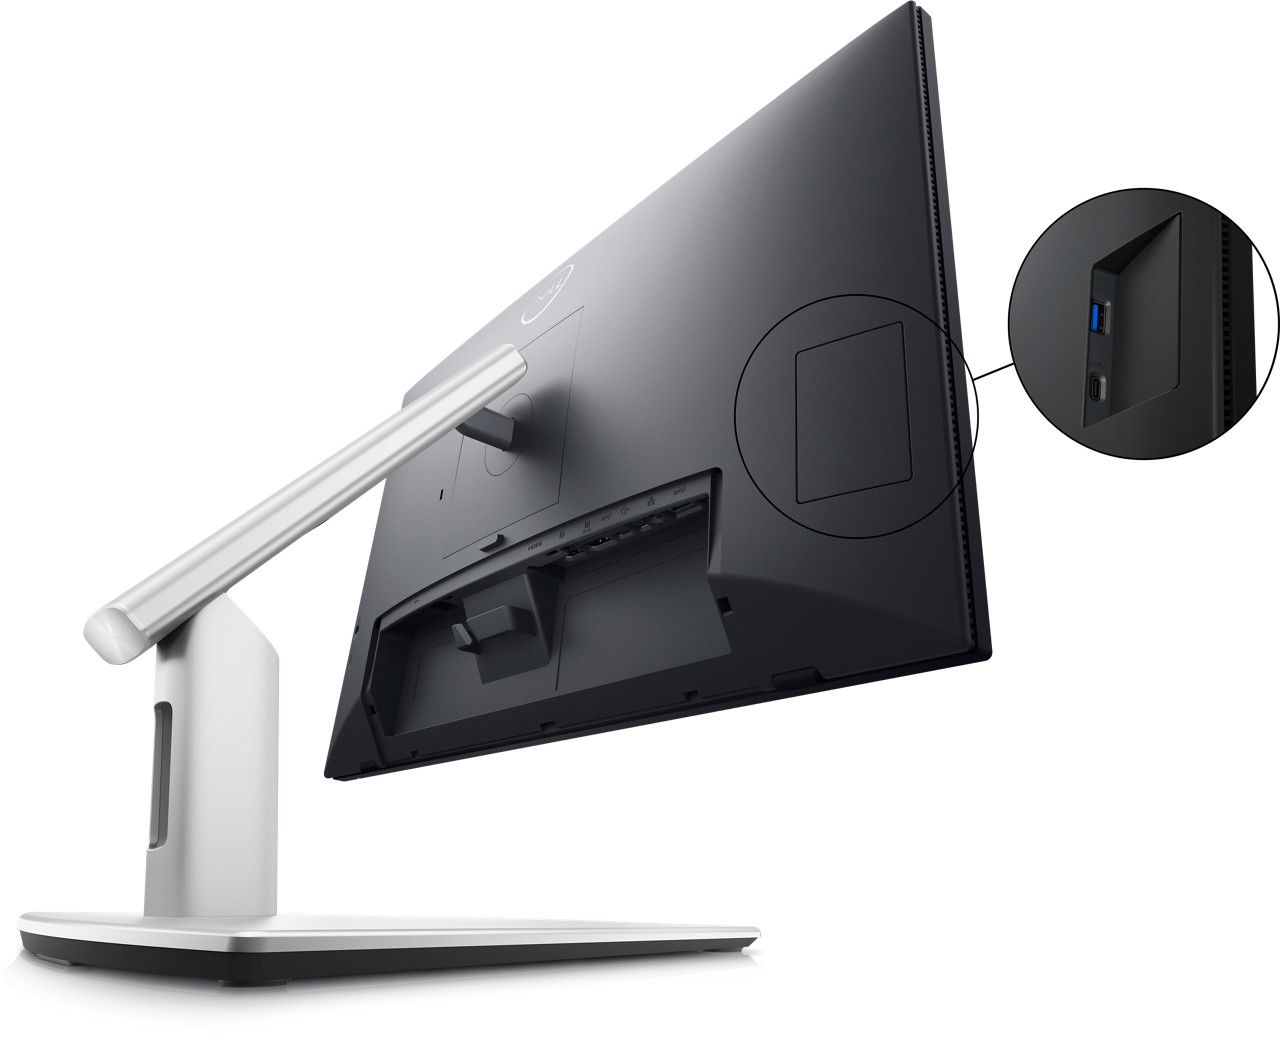 Dell 24 inch USB-C Hub Touch Monitor - Computer Monitor